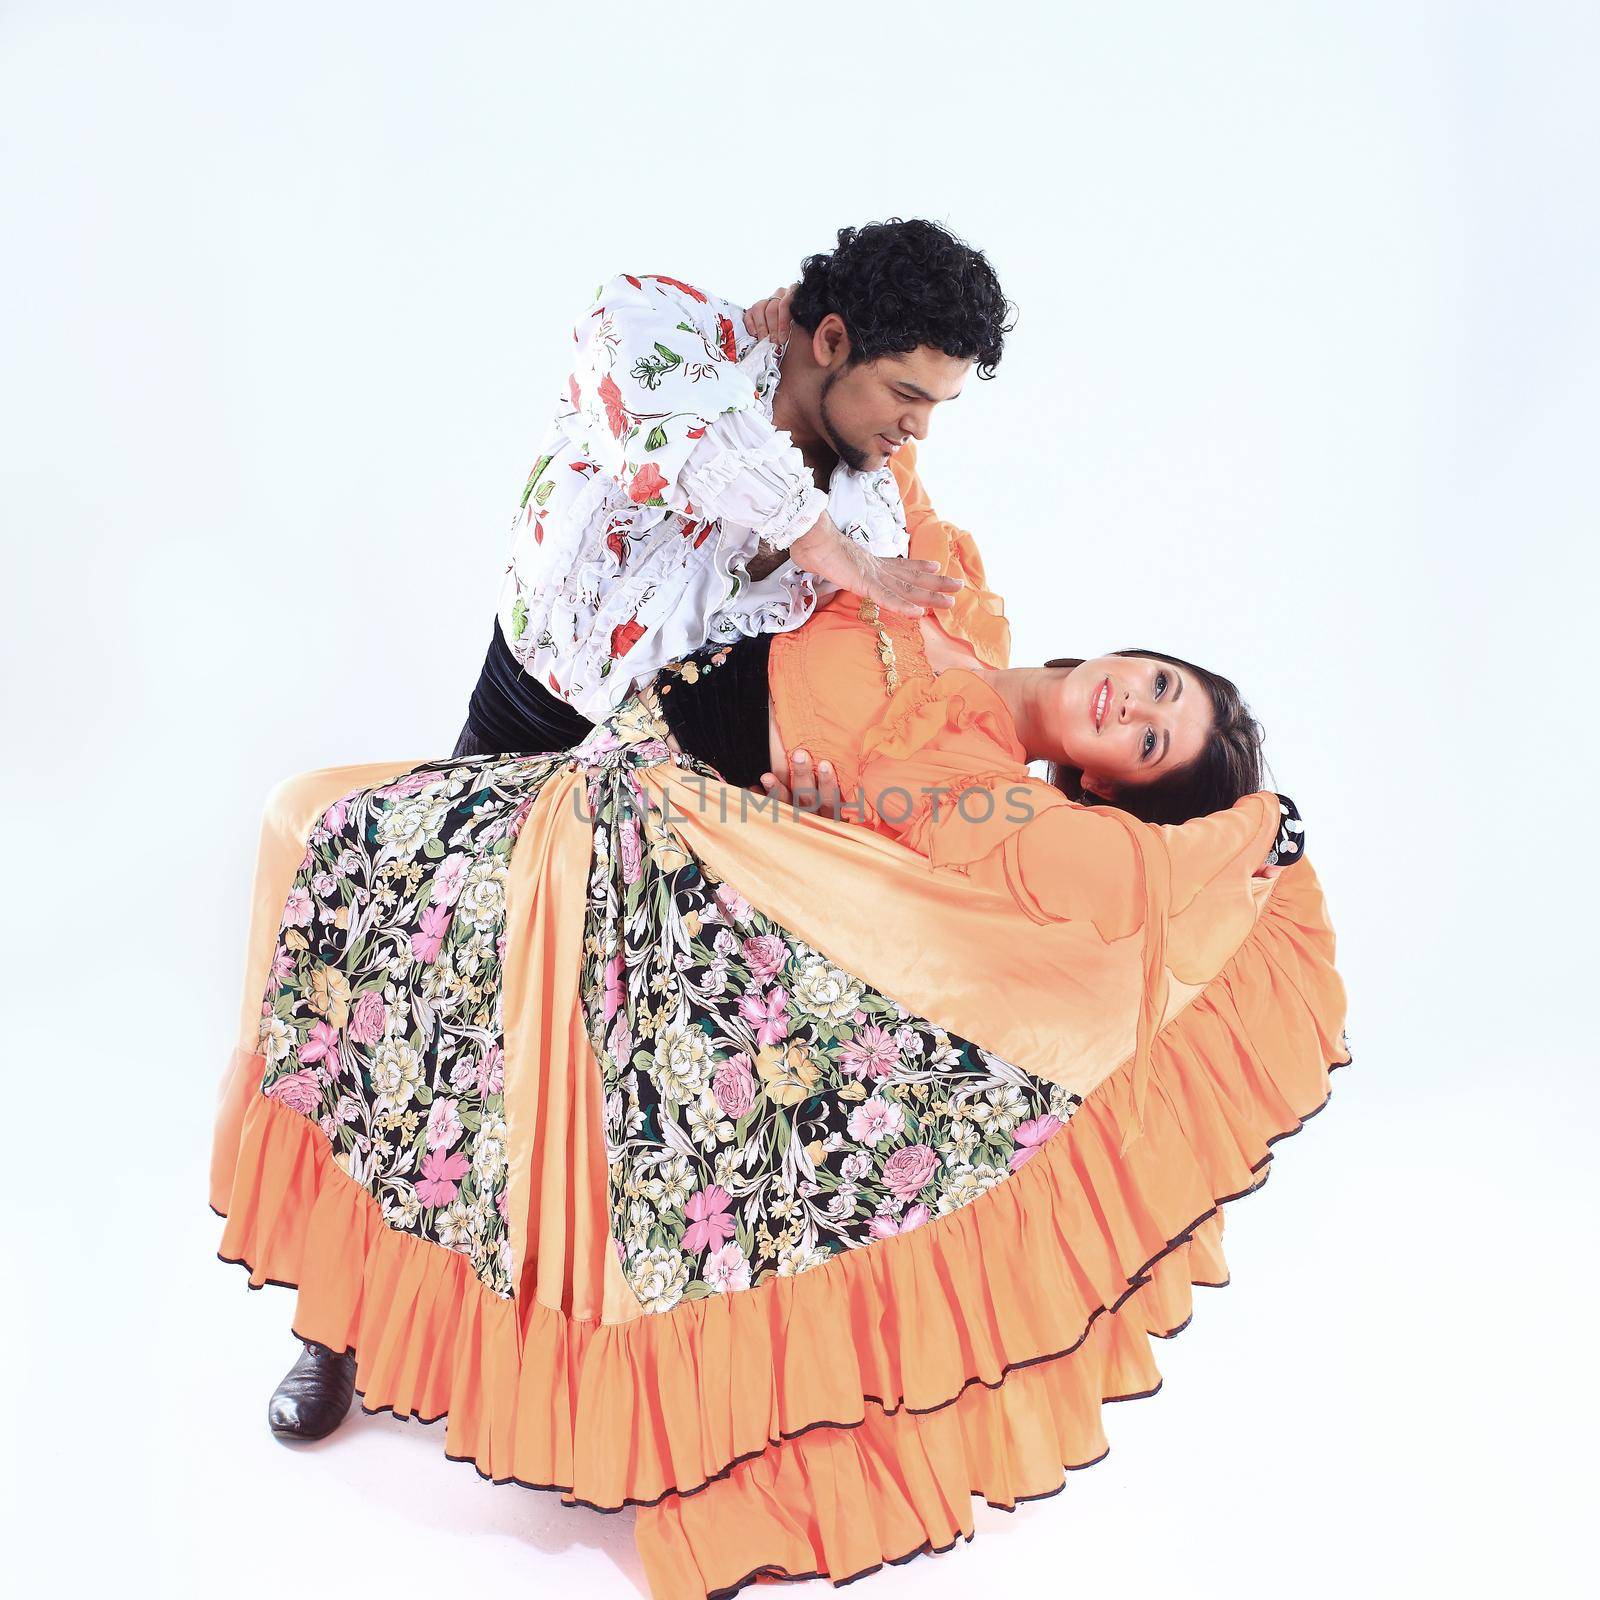 Gypsy dance pair.Gypsy dance.a dance show.the national costume.ethnic culture.the photo with blank space for text